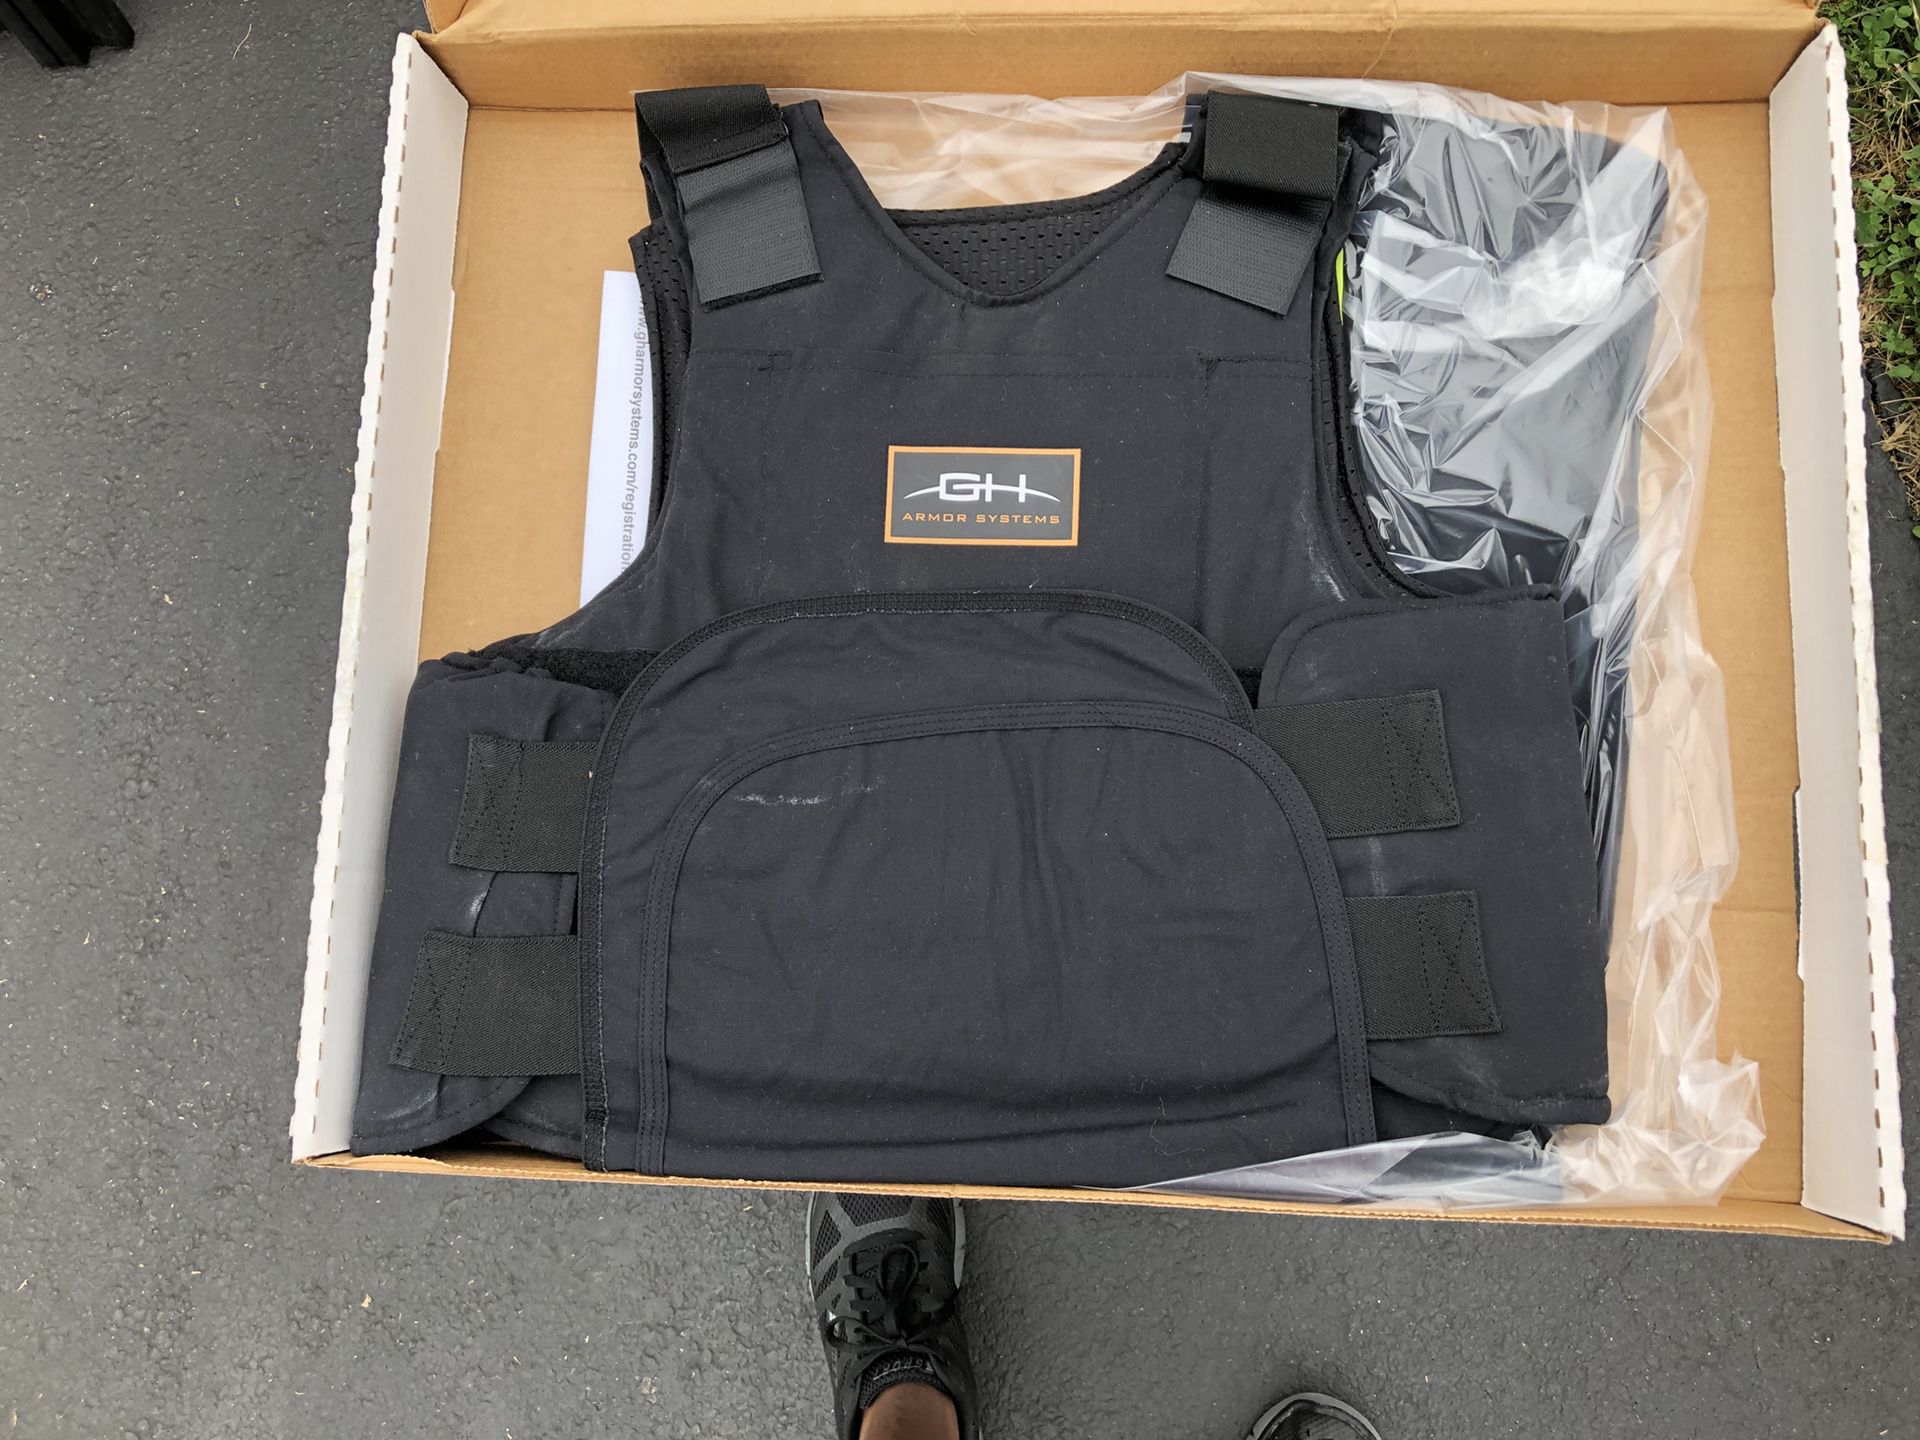 GH Amor Systems Protective Vest